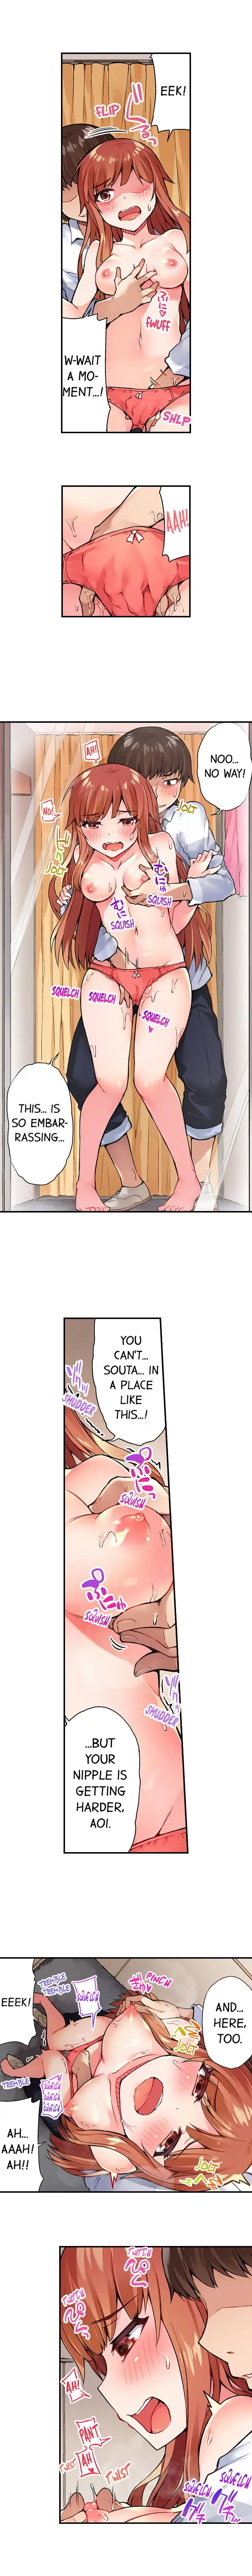 Traditional Job of Washing Girls’ Body - Chapter 24 Page 7